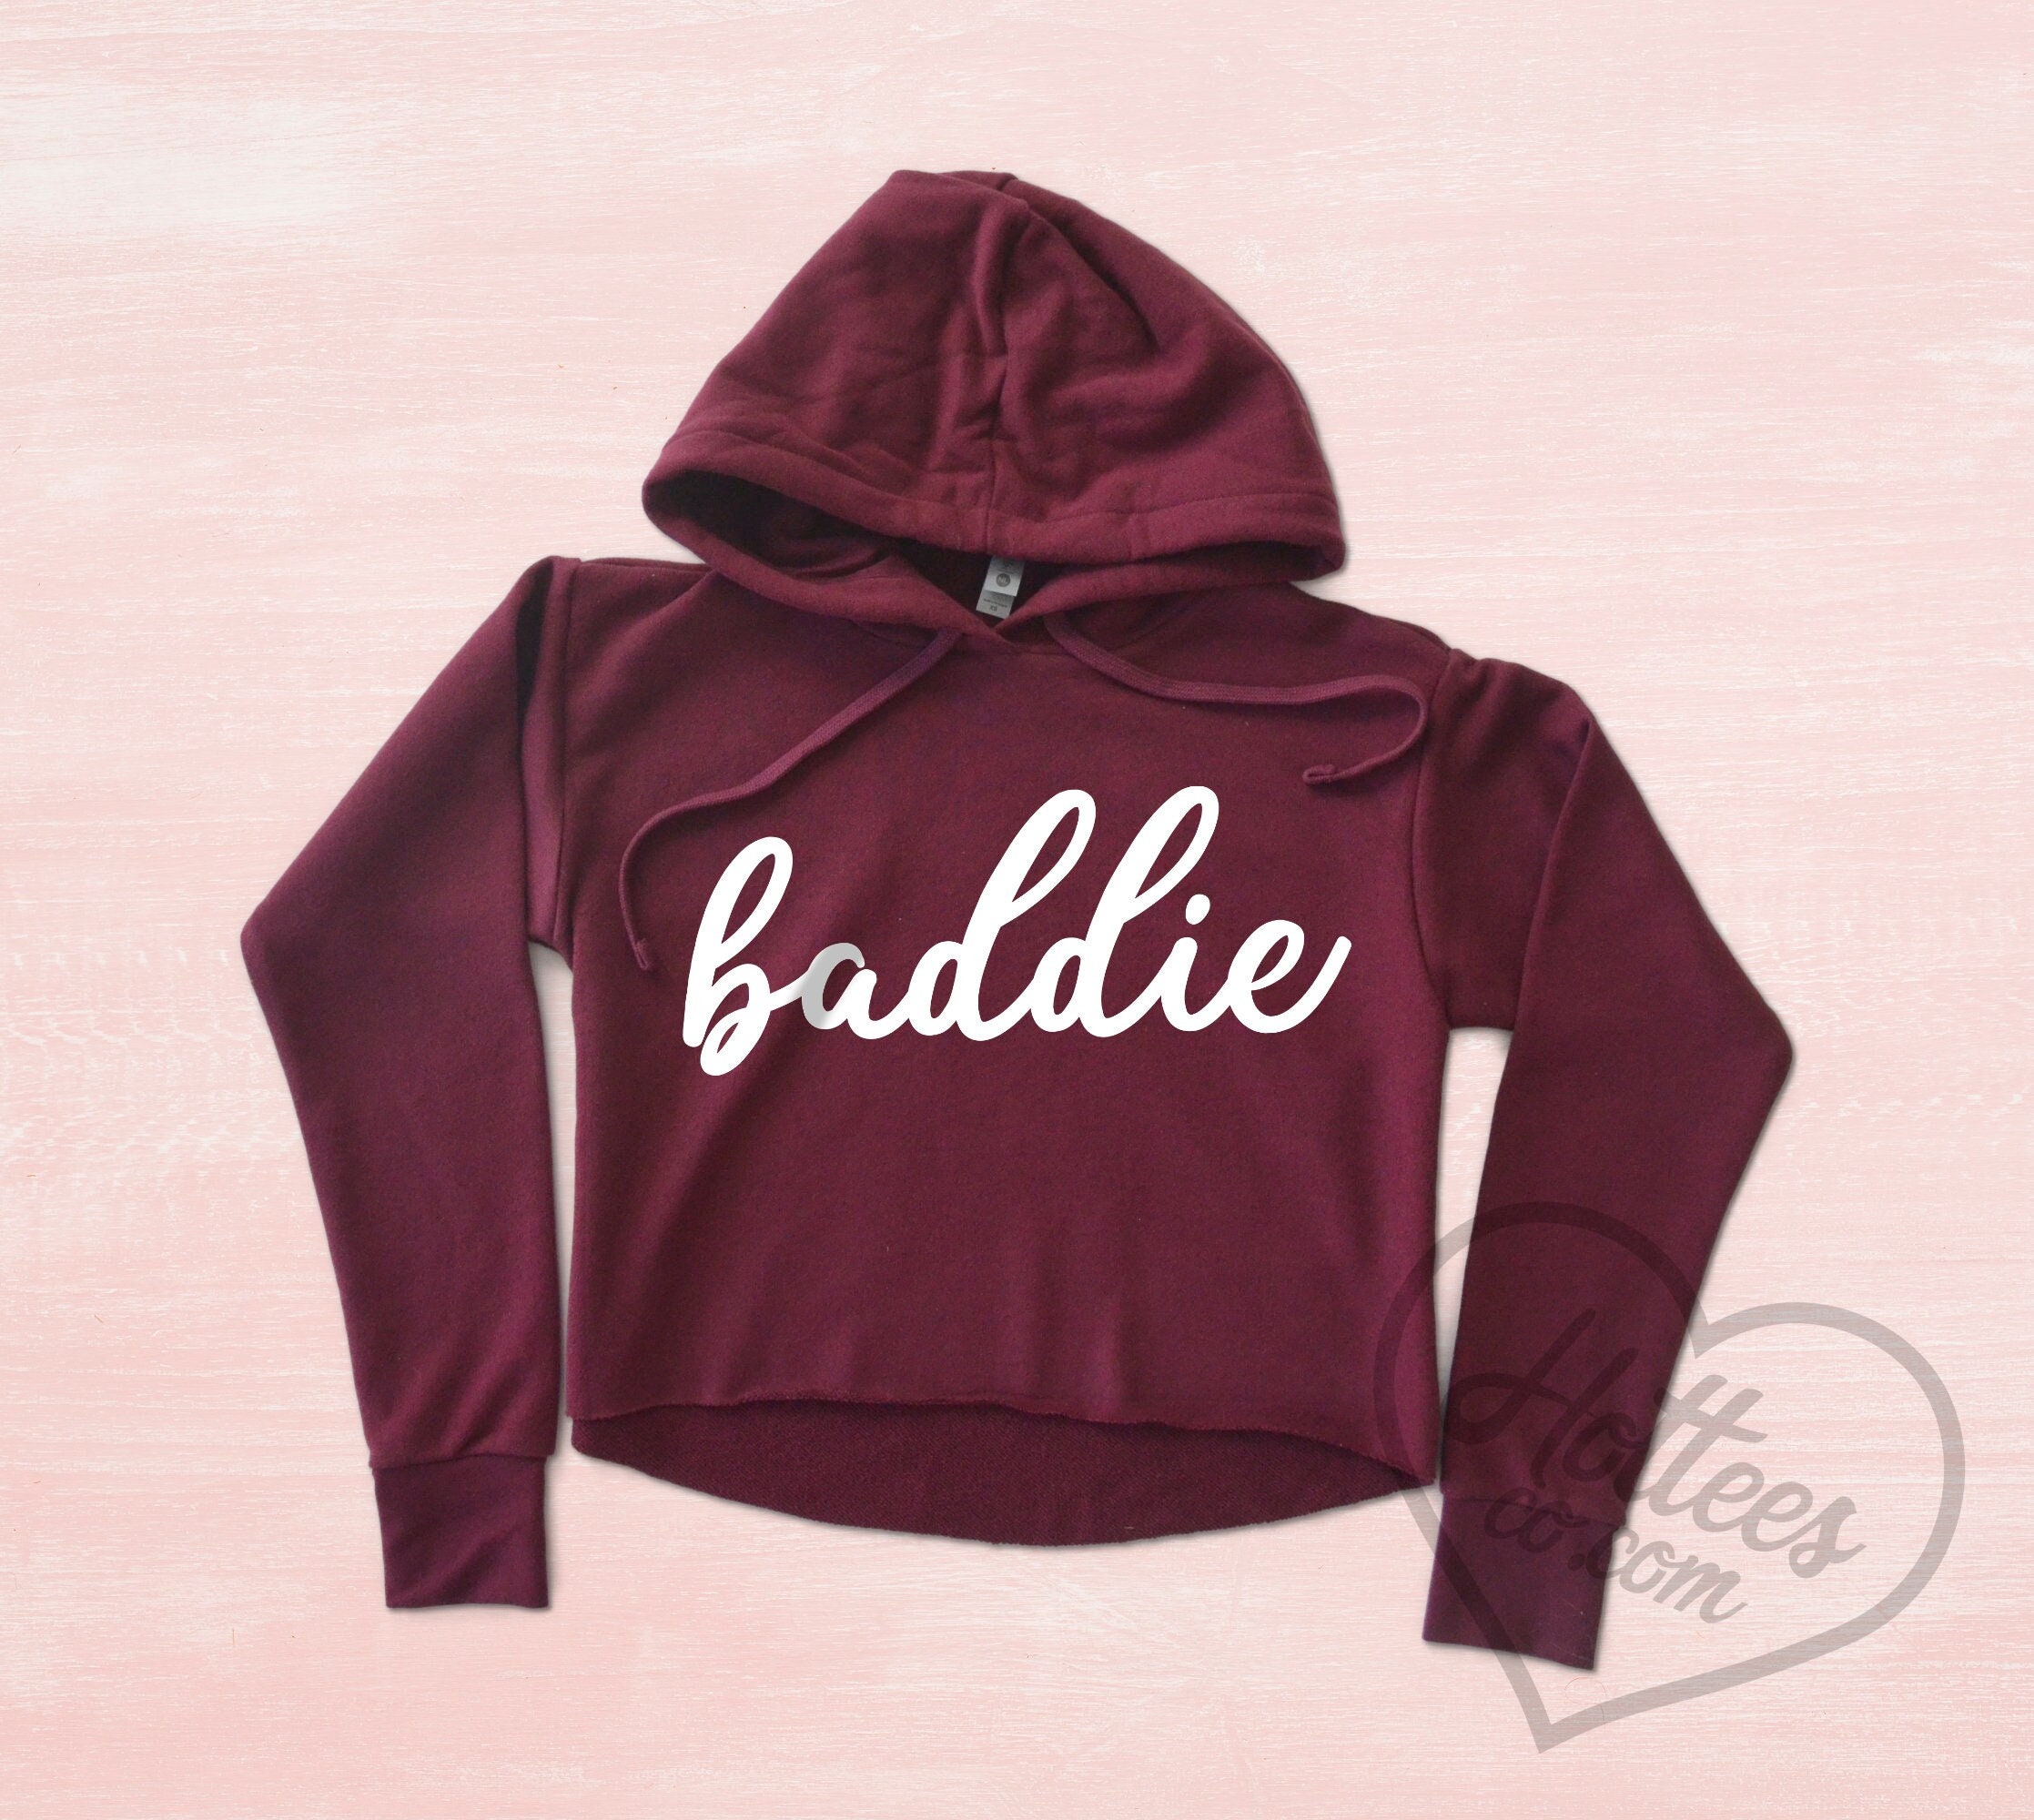 Baddie on a budget? We've got you covered! Check out our stunning